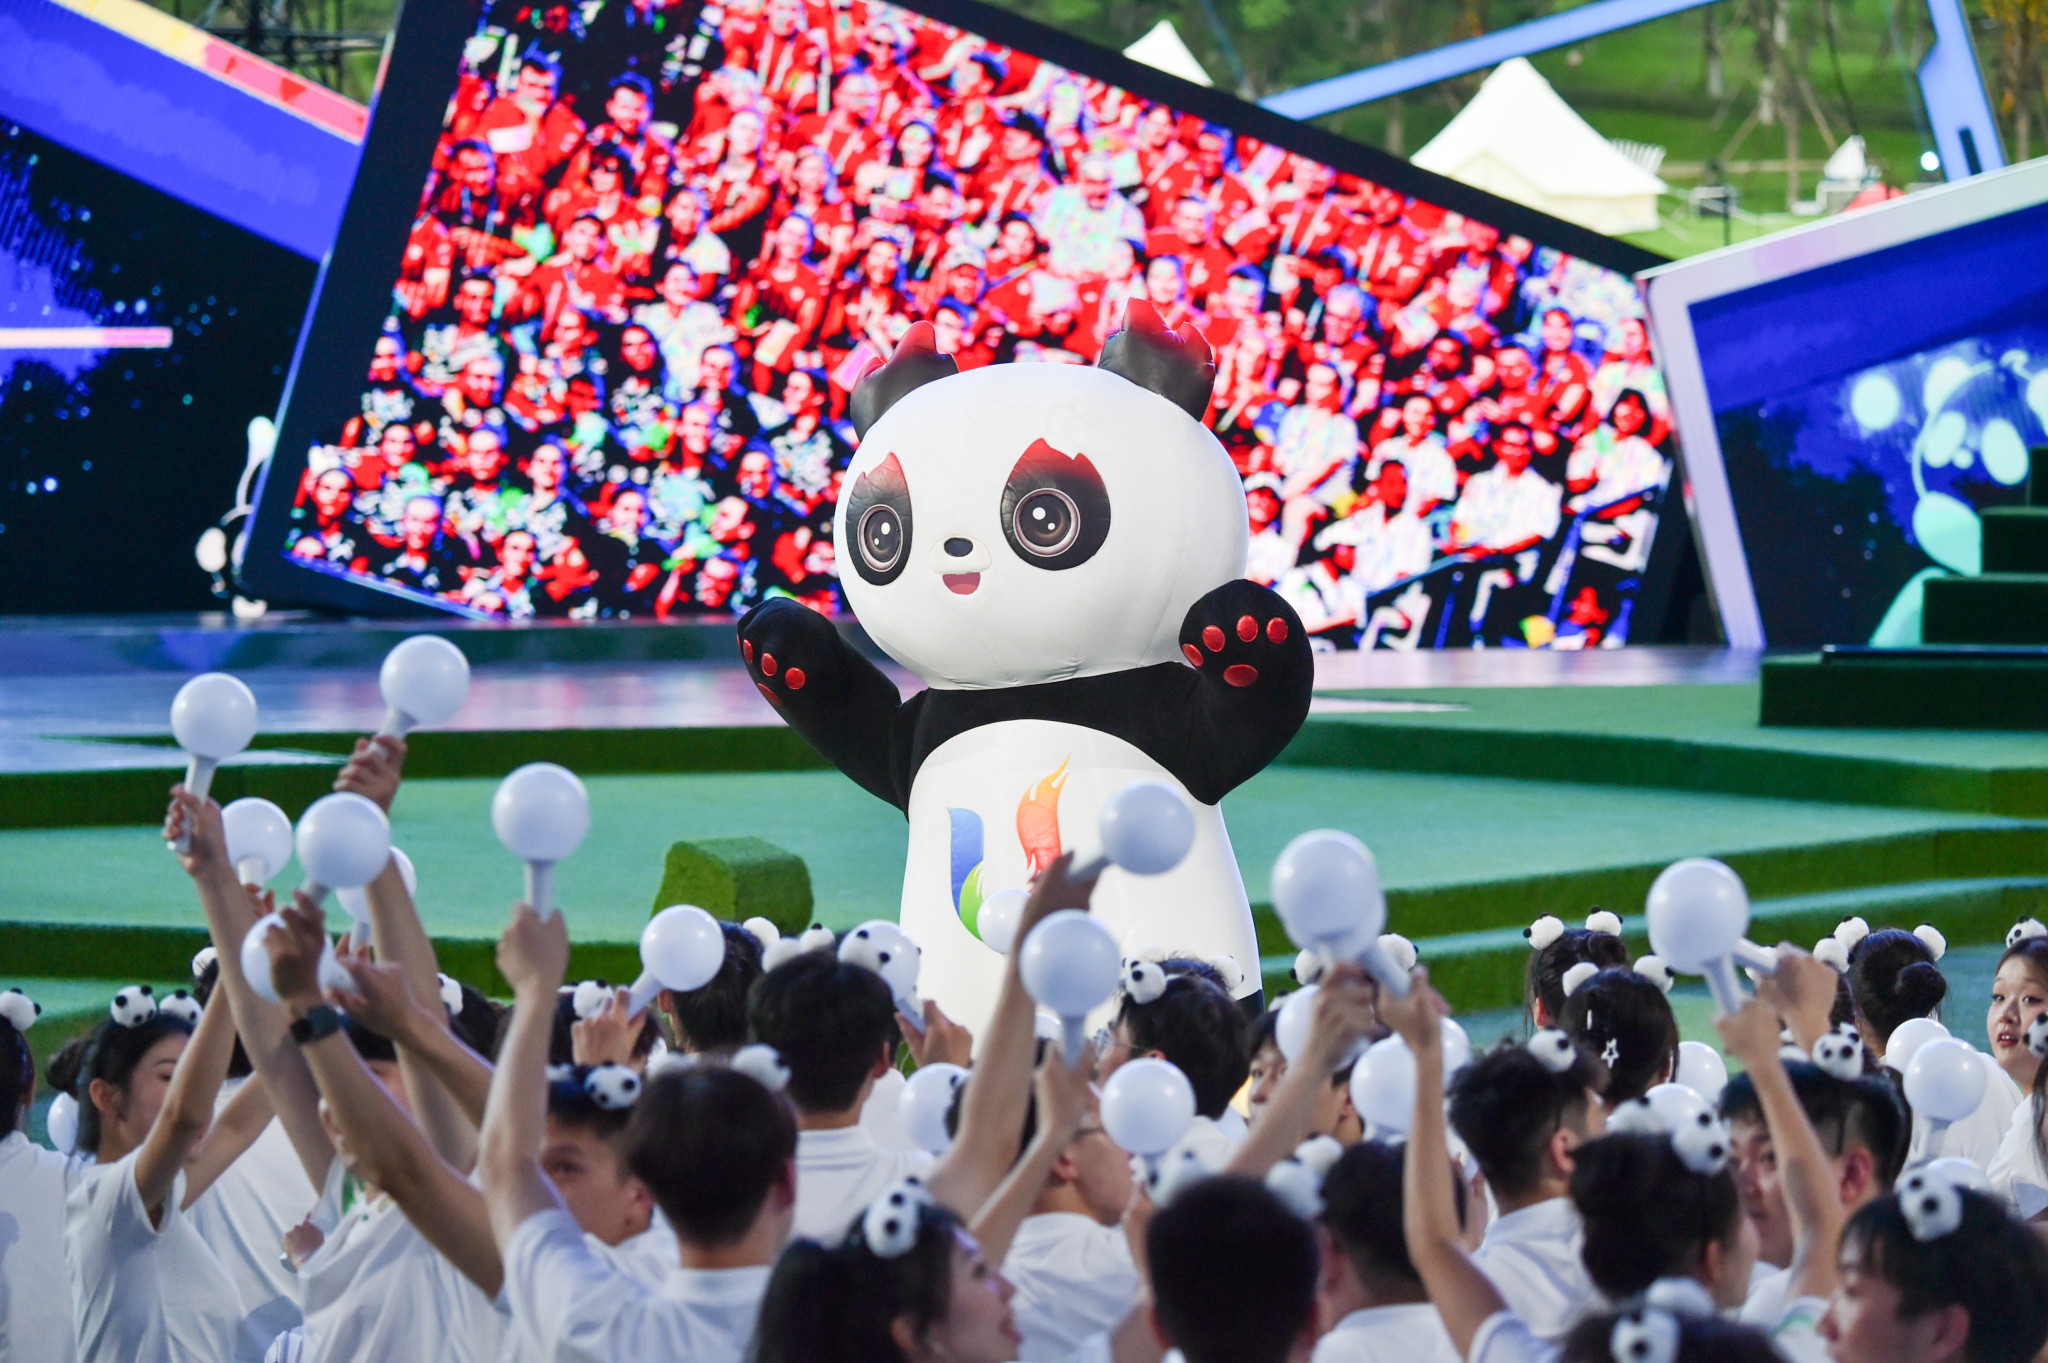 Chengdu 2021 organisers have been hailed for their use of high-tech products to add to participants' overall experience of the Games ©Chengdu 2021